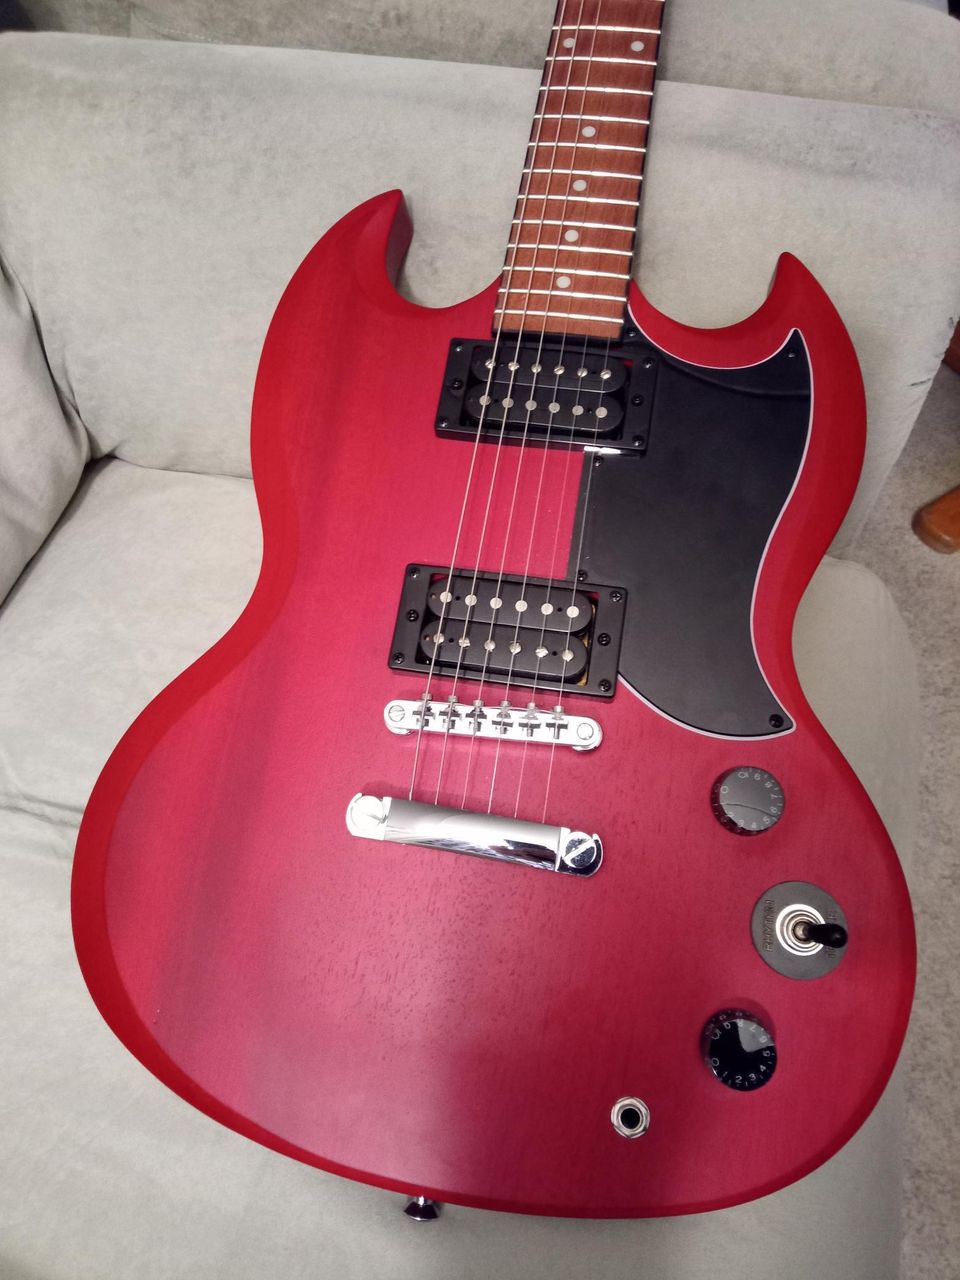 Epiphone SG special II